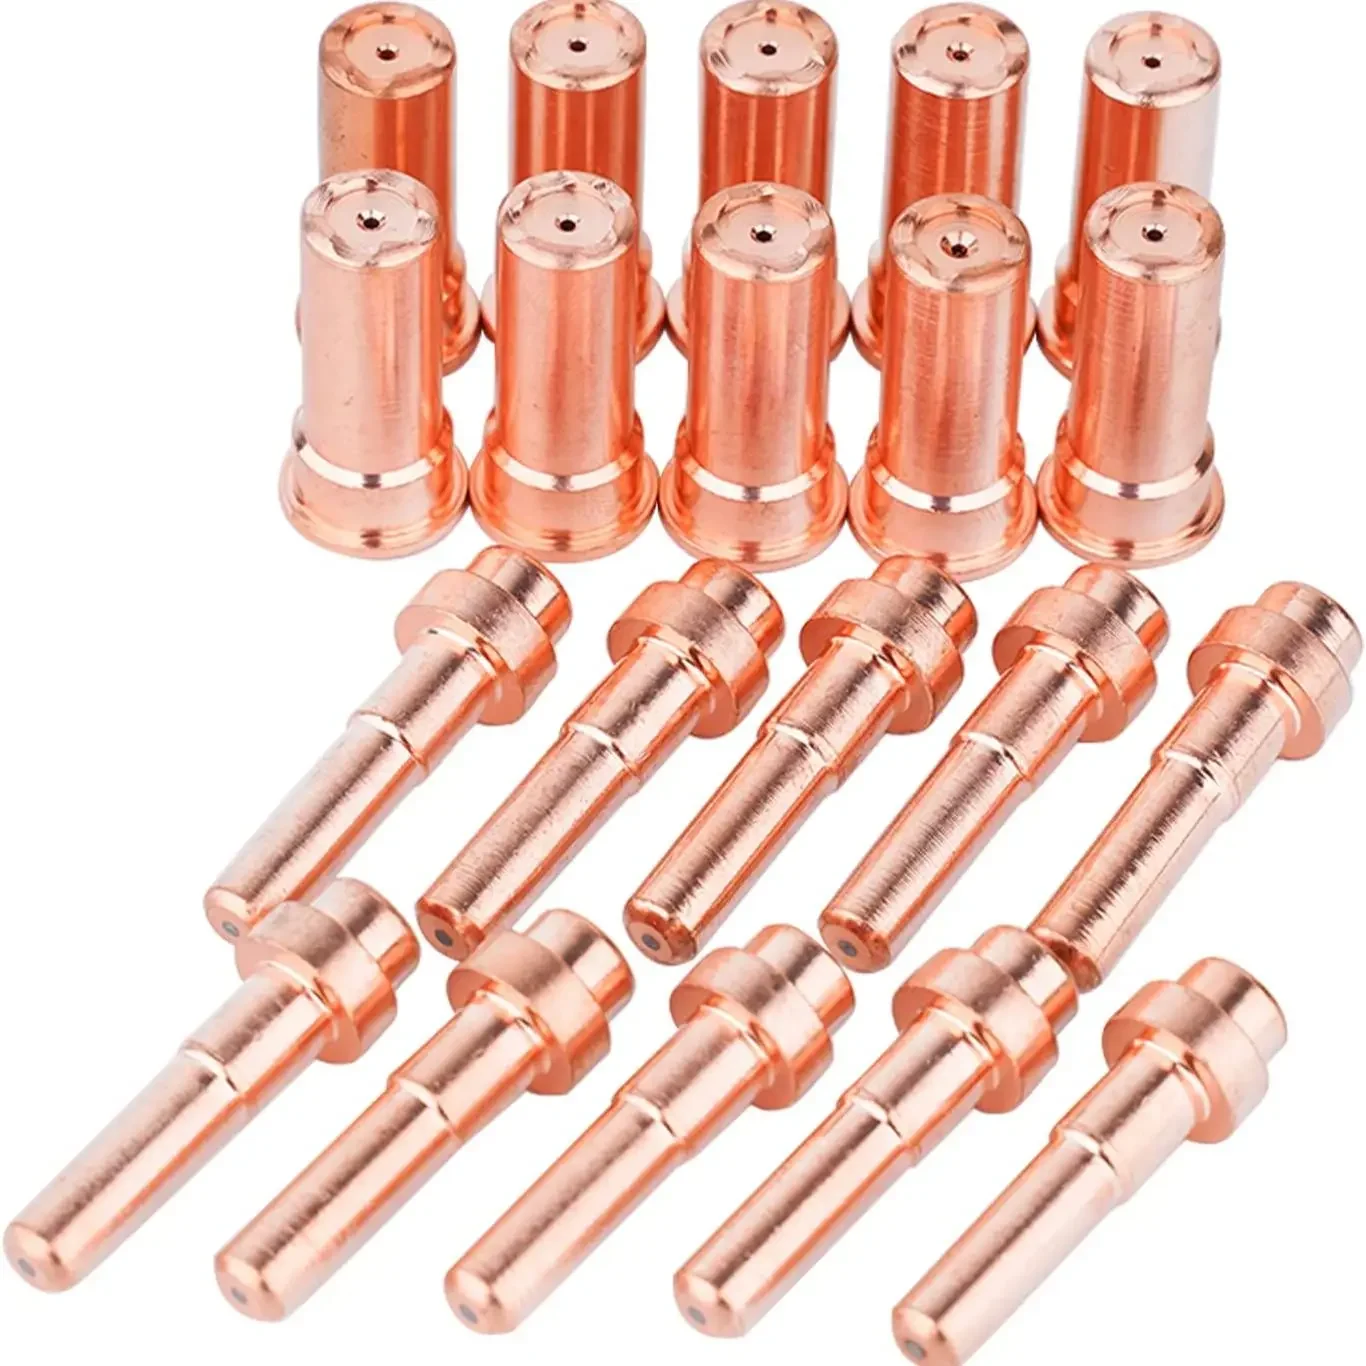 

20Pcs Welding Knight CP50 Extended Electrode 1518-HF Tip 1370 Extended Nozzle Fit Plasma Consumables Cebora Torch